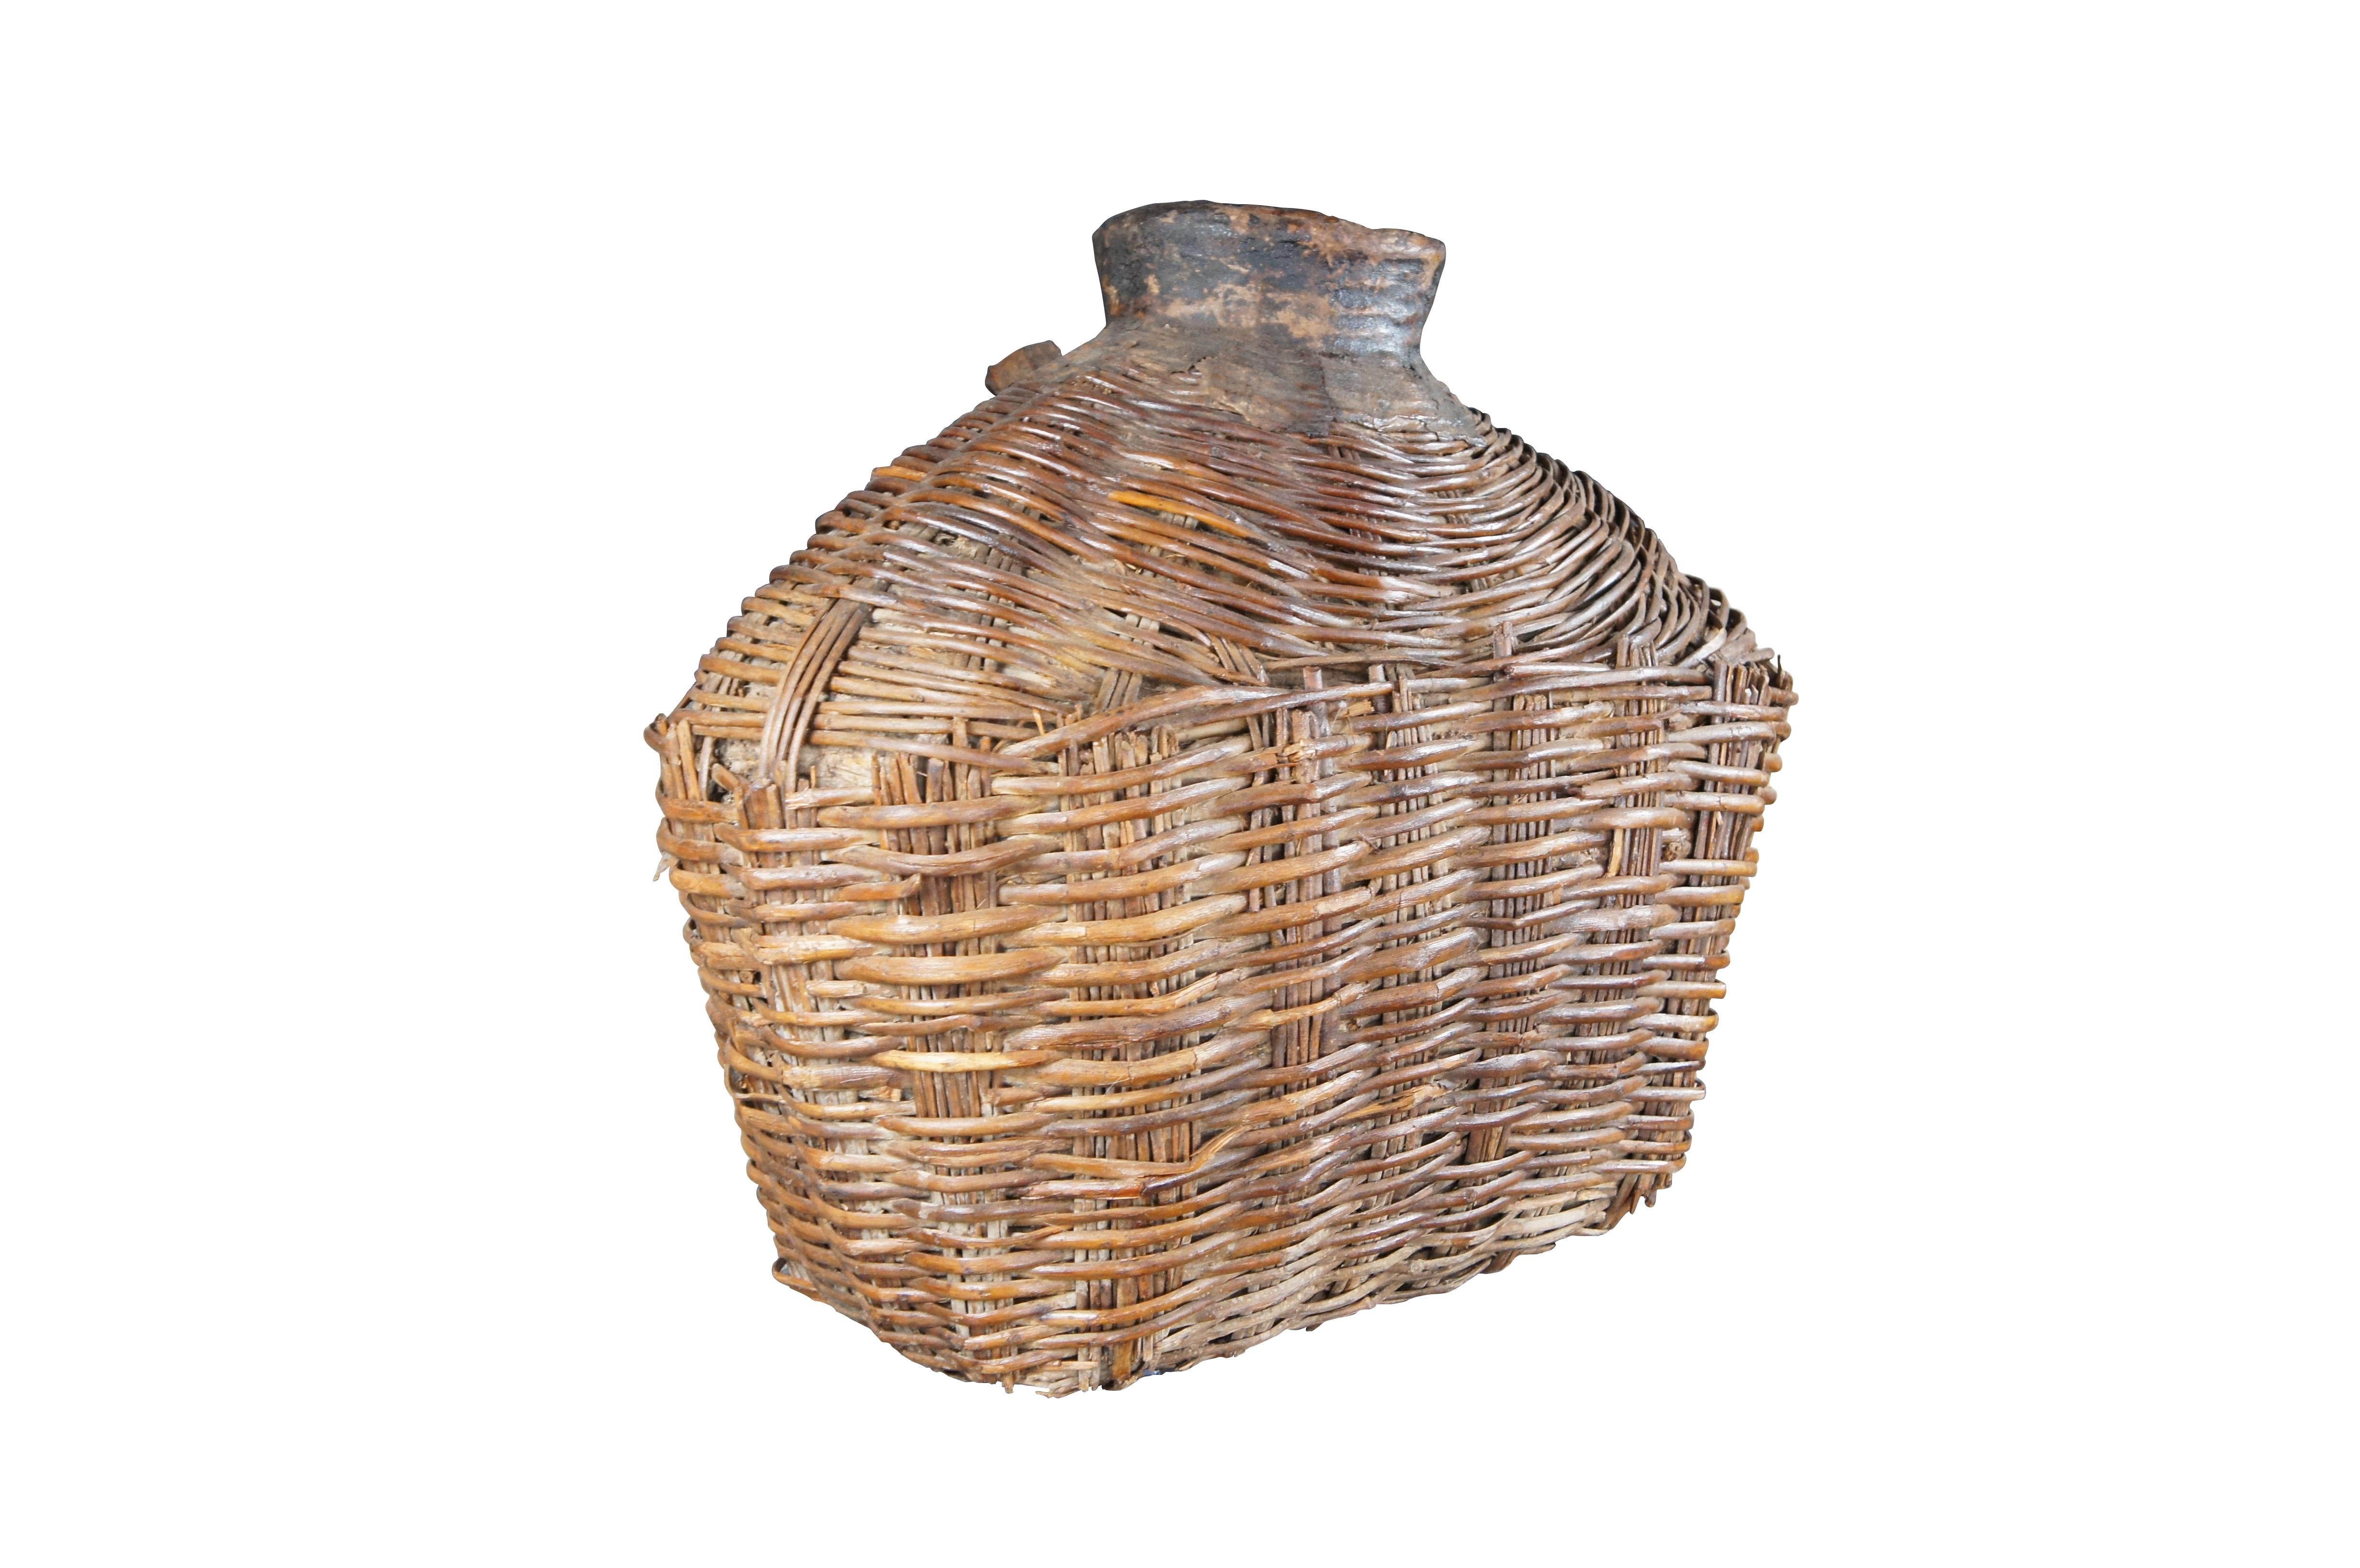 Early 20th Century Chinese Shanxi Willow Oil Container / Food Storage Vessel. Beautifully woven with natural patina from years of use. An unusual yet perfect decorative piece for display in a corner, on a bookcase or in a nook.

Dimensions:
24